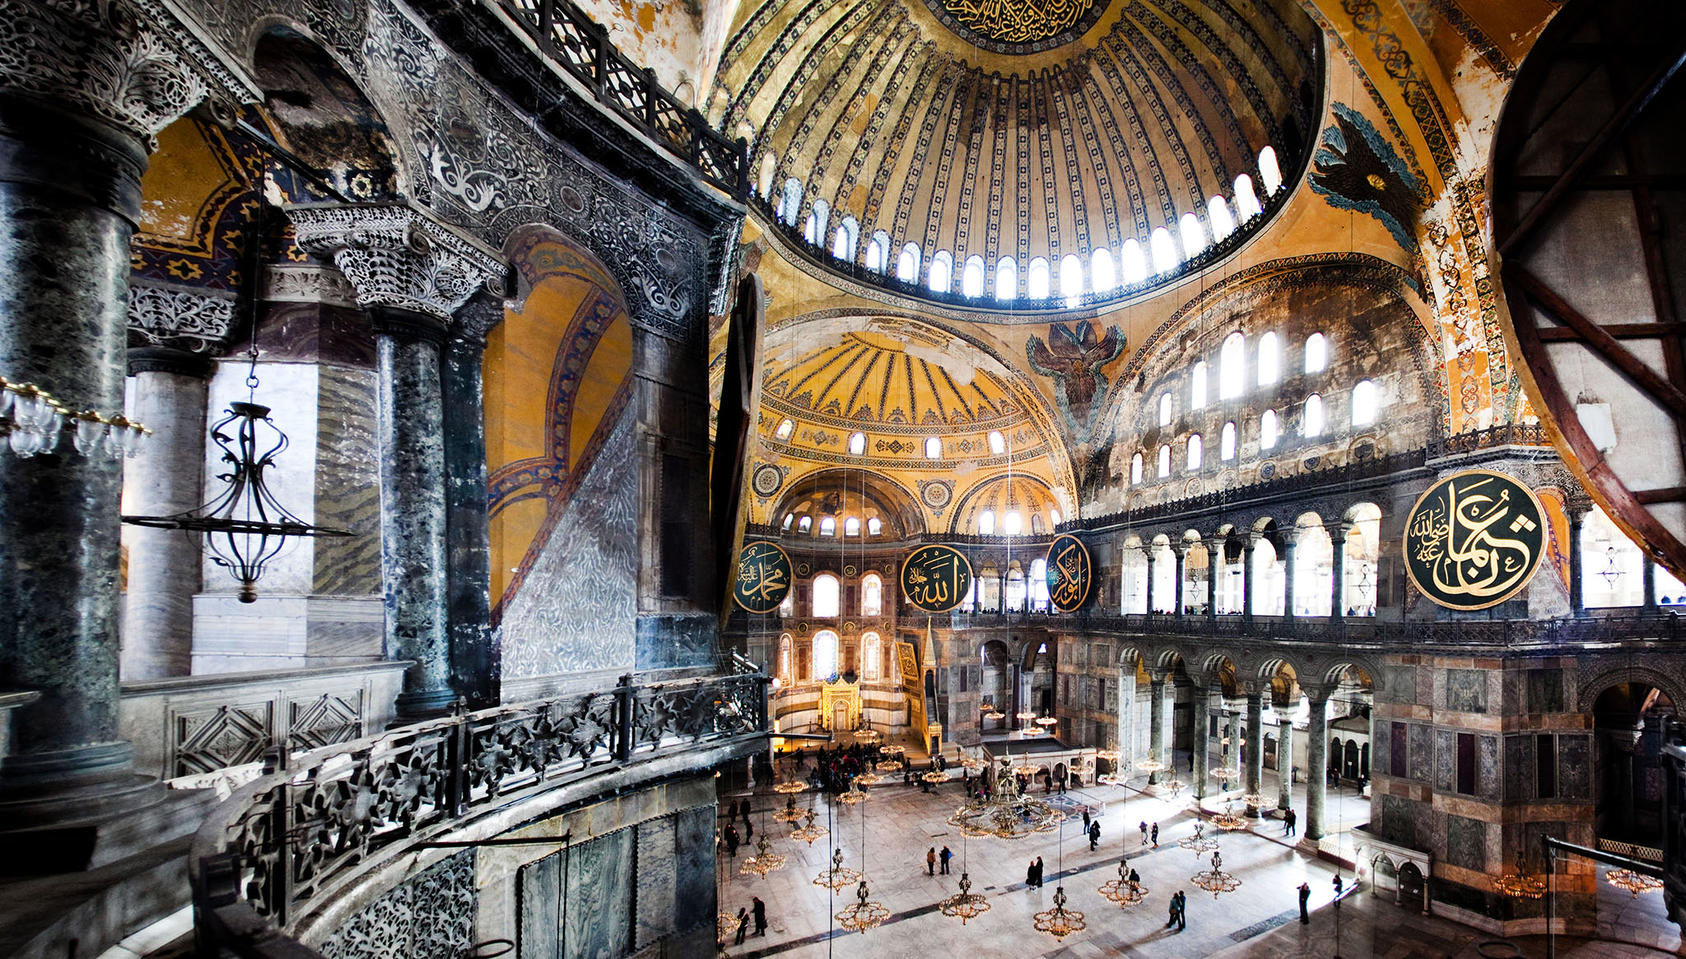 Hagia Sophia, the Byzantine cathedral in Istanbul, Turkey, on Nov. 26, 2011. Hagia Sophia’s rededication as a Muslim place of worship, after decades as a museum, threatens to cloak its extravagantly reverberant acoustics. (Piotr Redlinski/The New York Times)